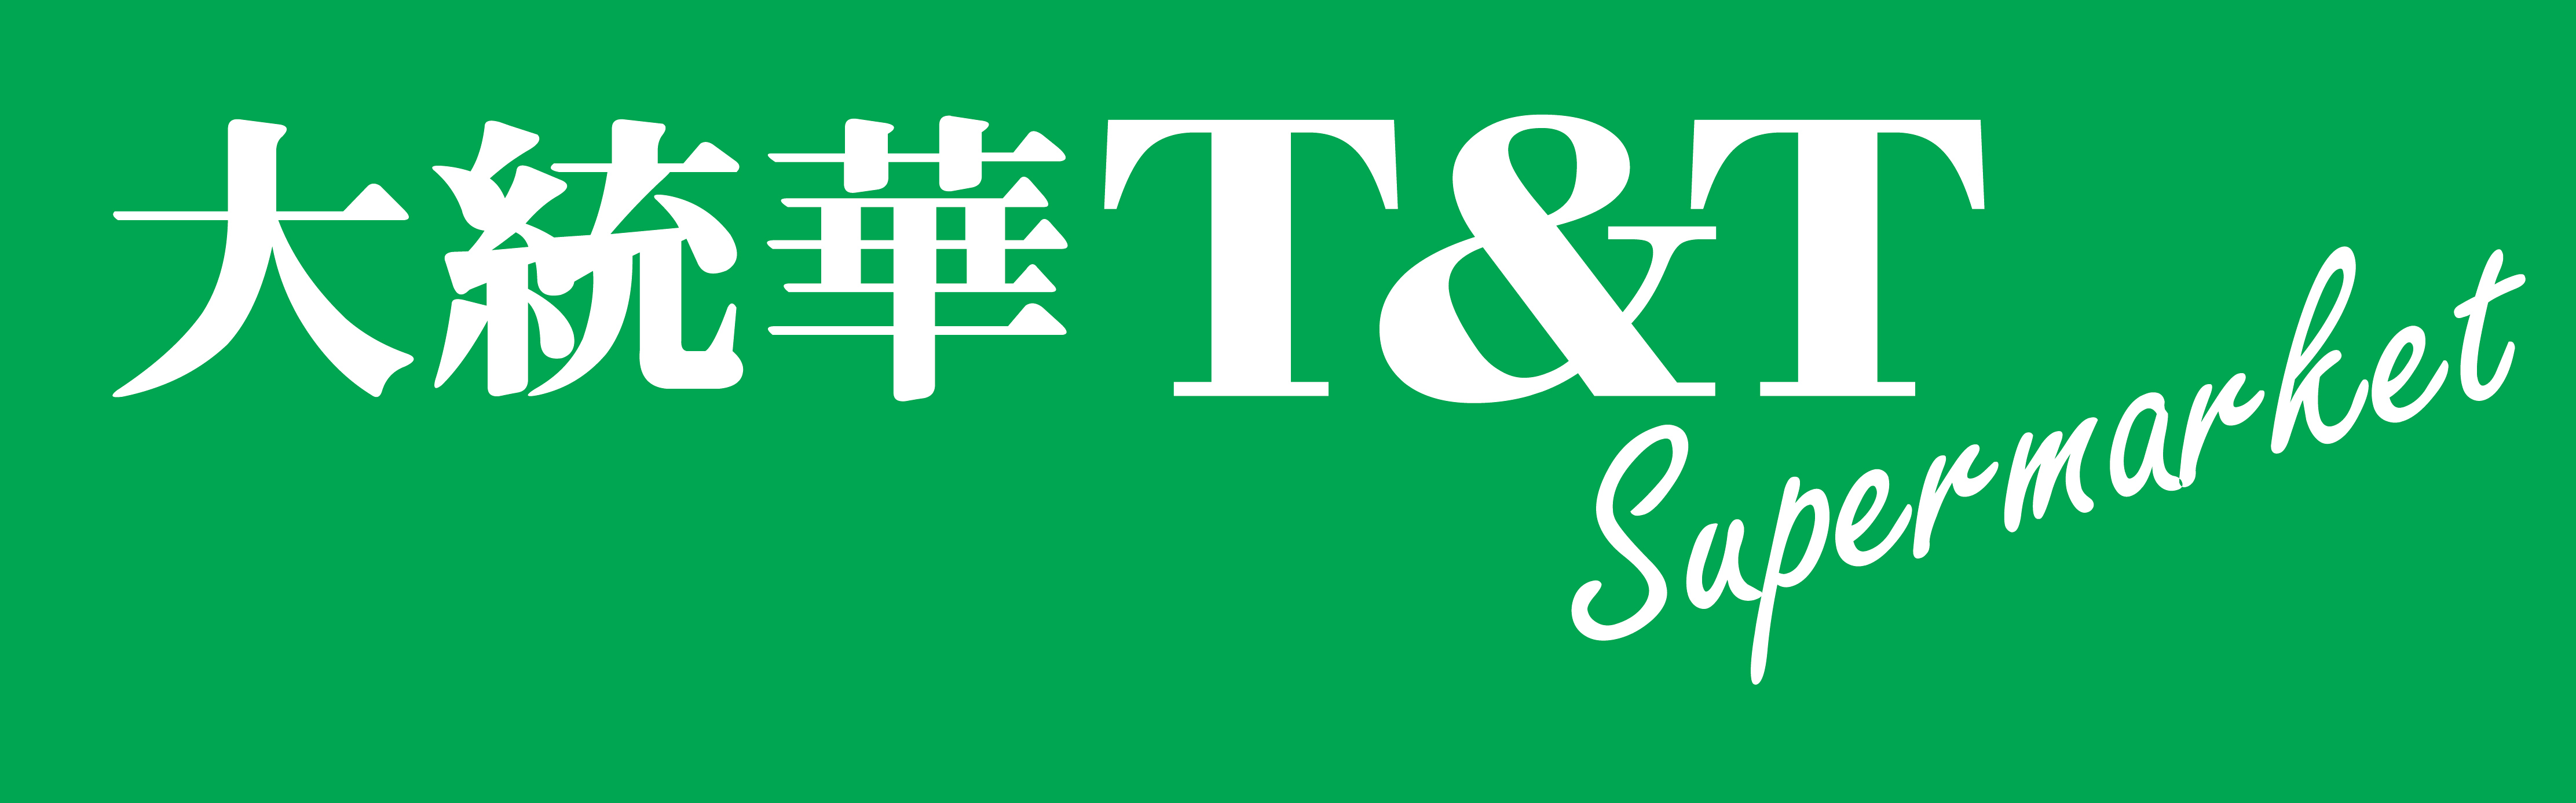 T&Tlogo_with Green Background-02